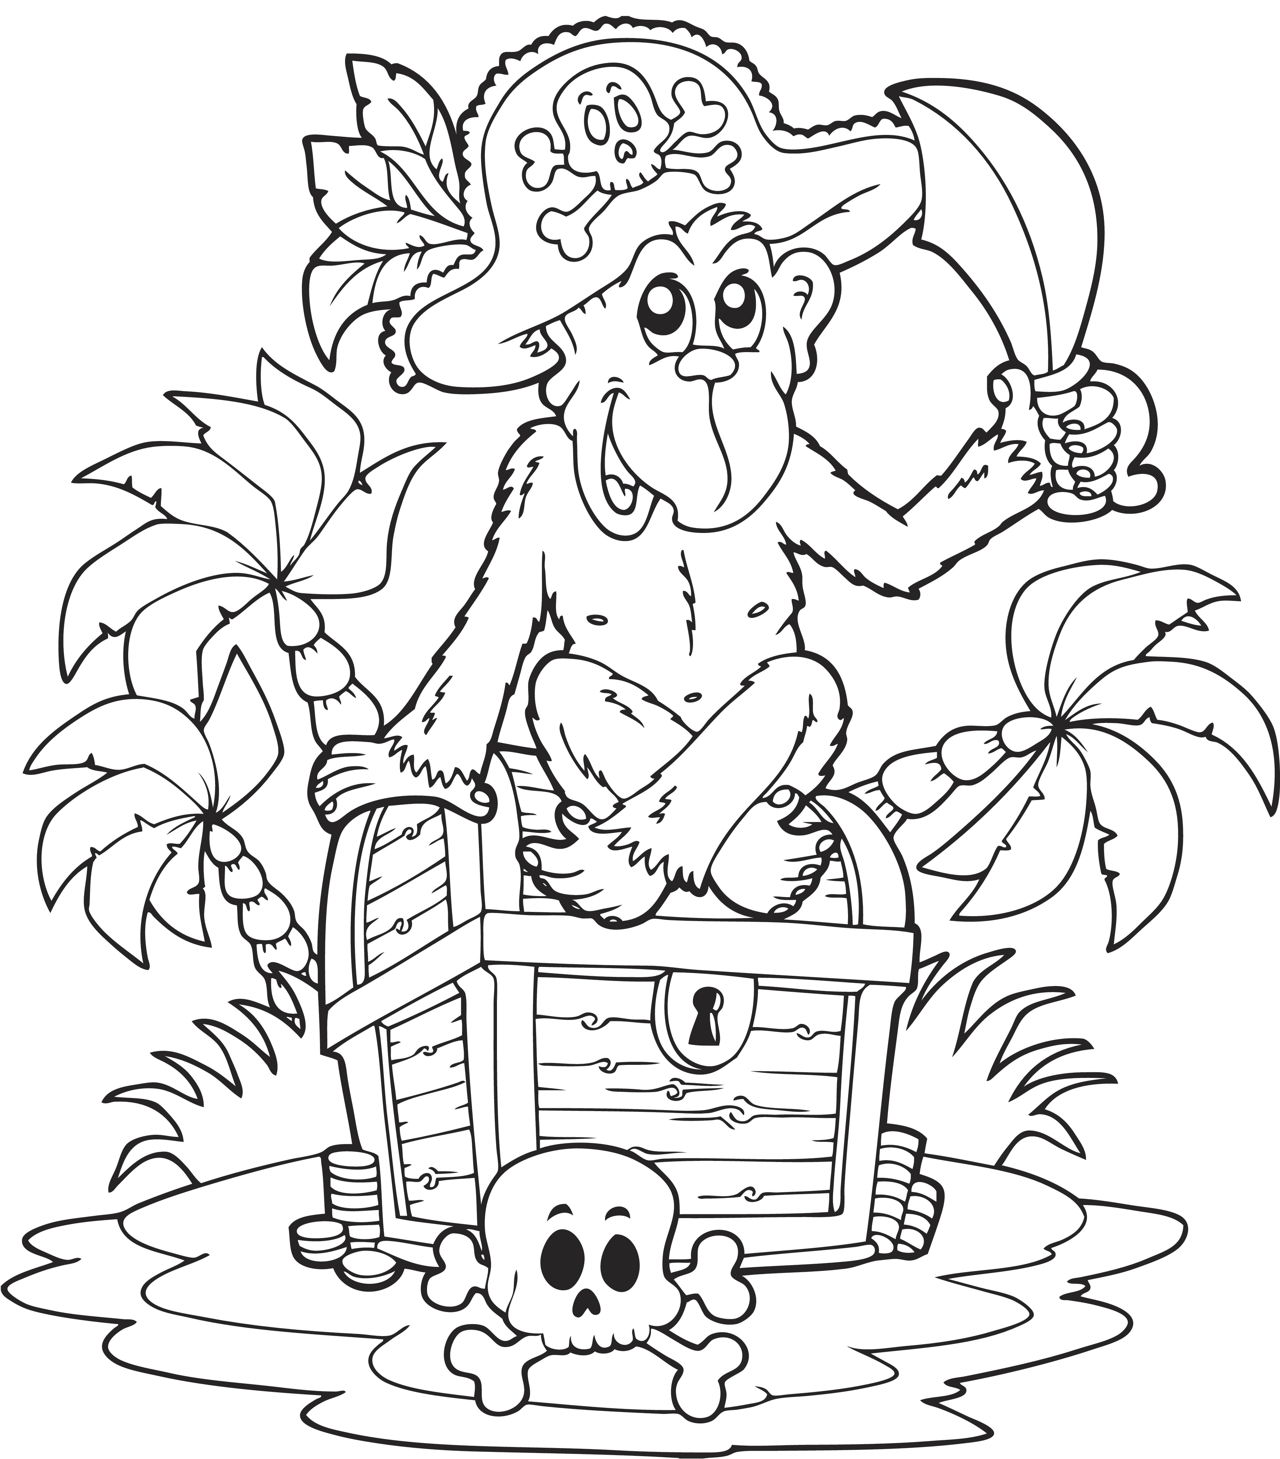 wonderful-pirate-clip-art-and-coloring-pages-for-kids-art-hearty